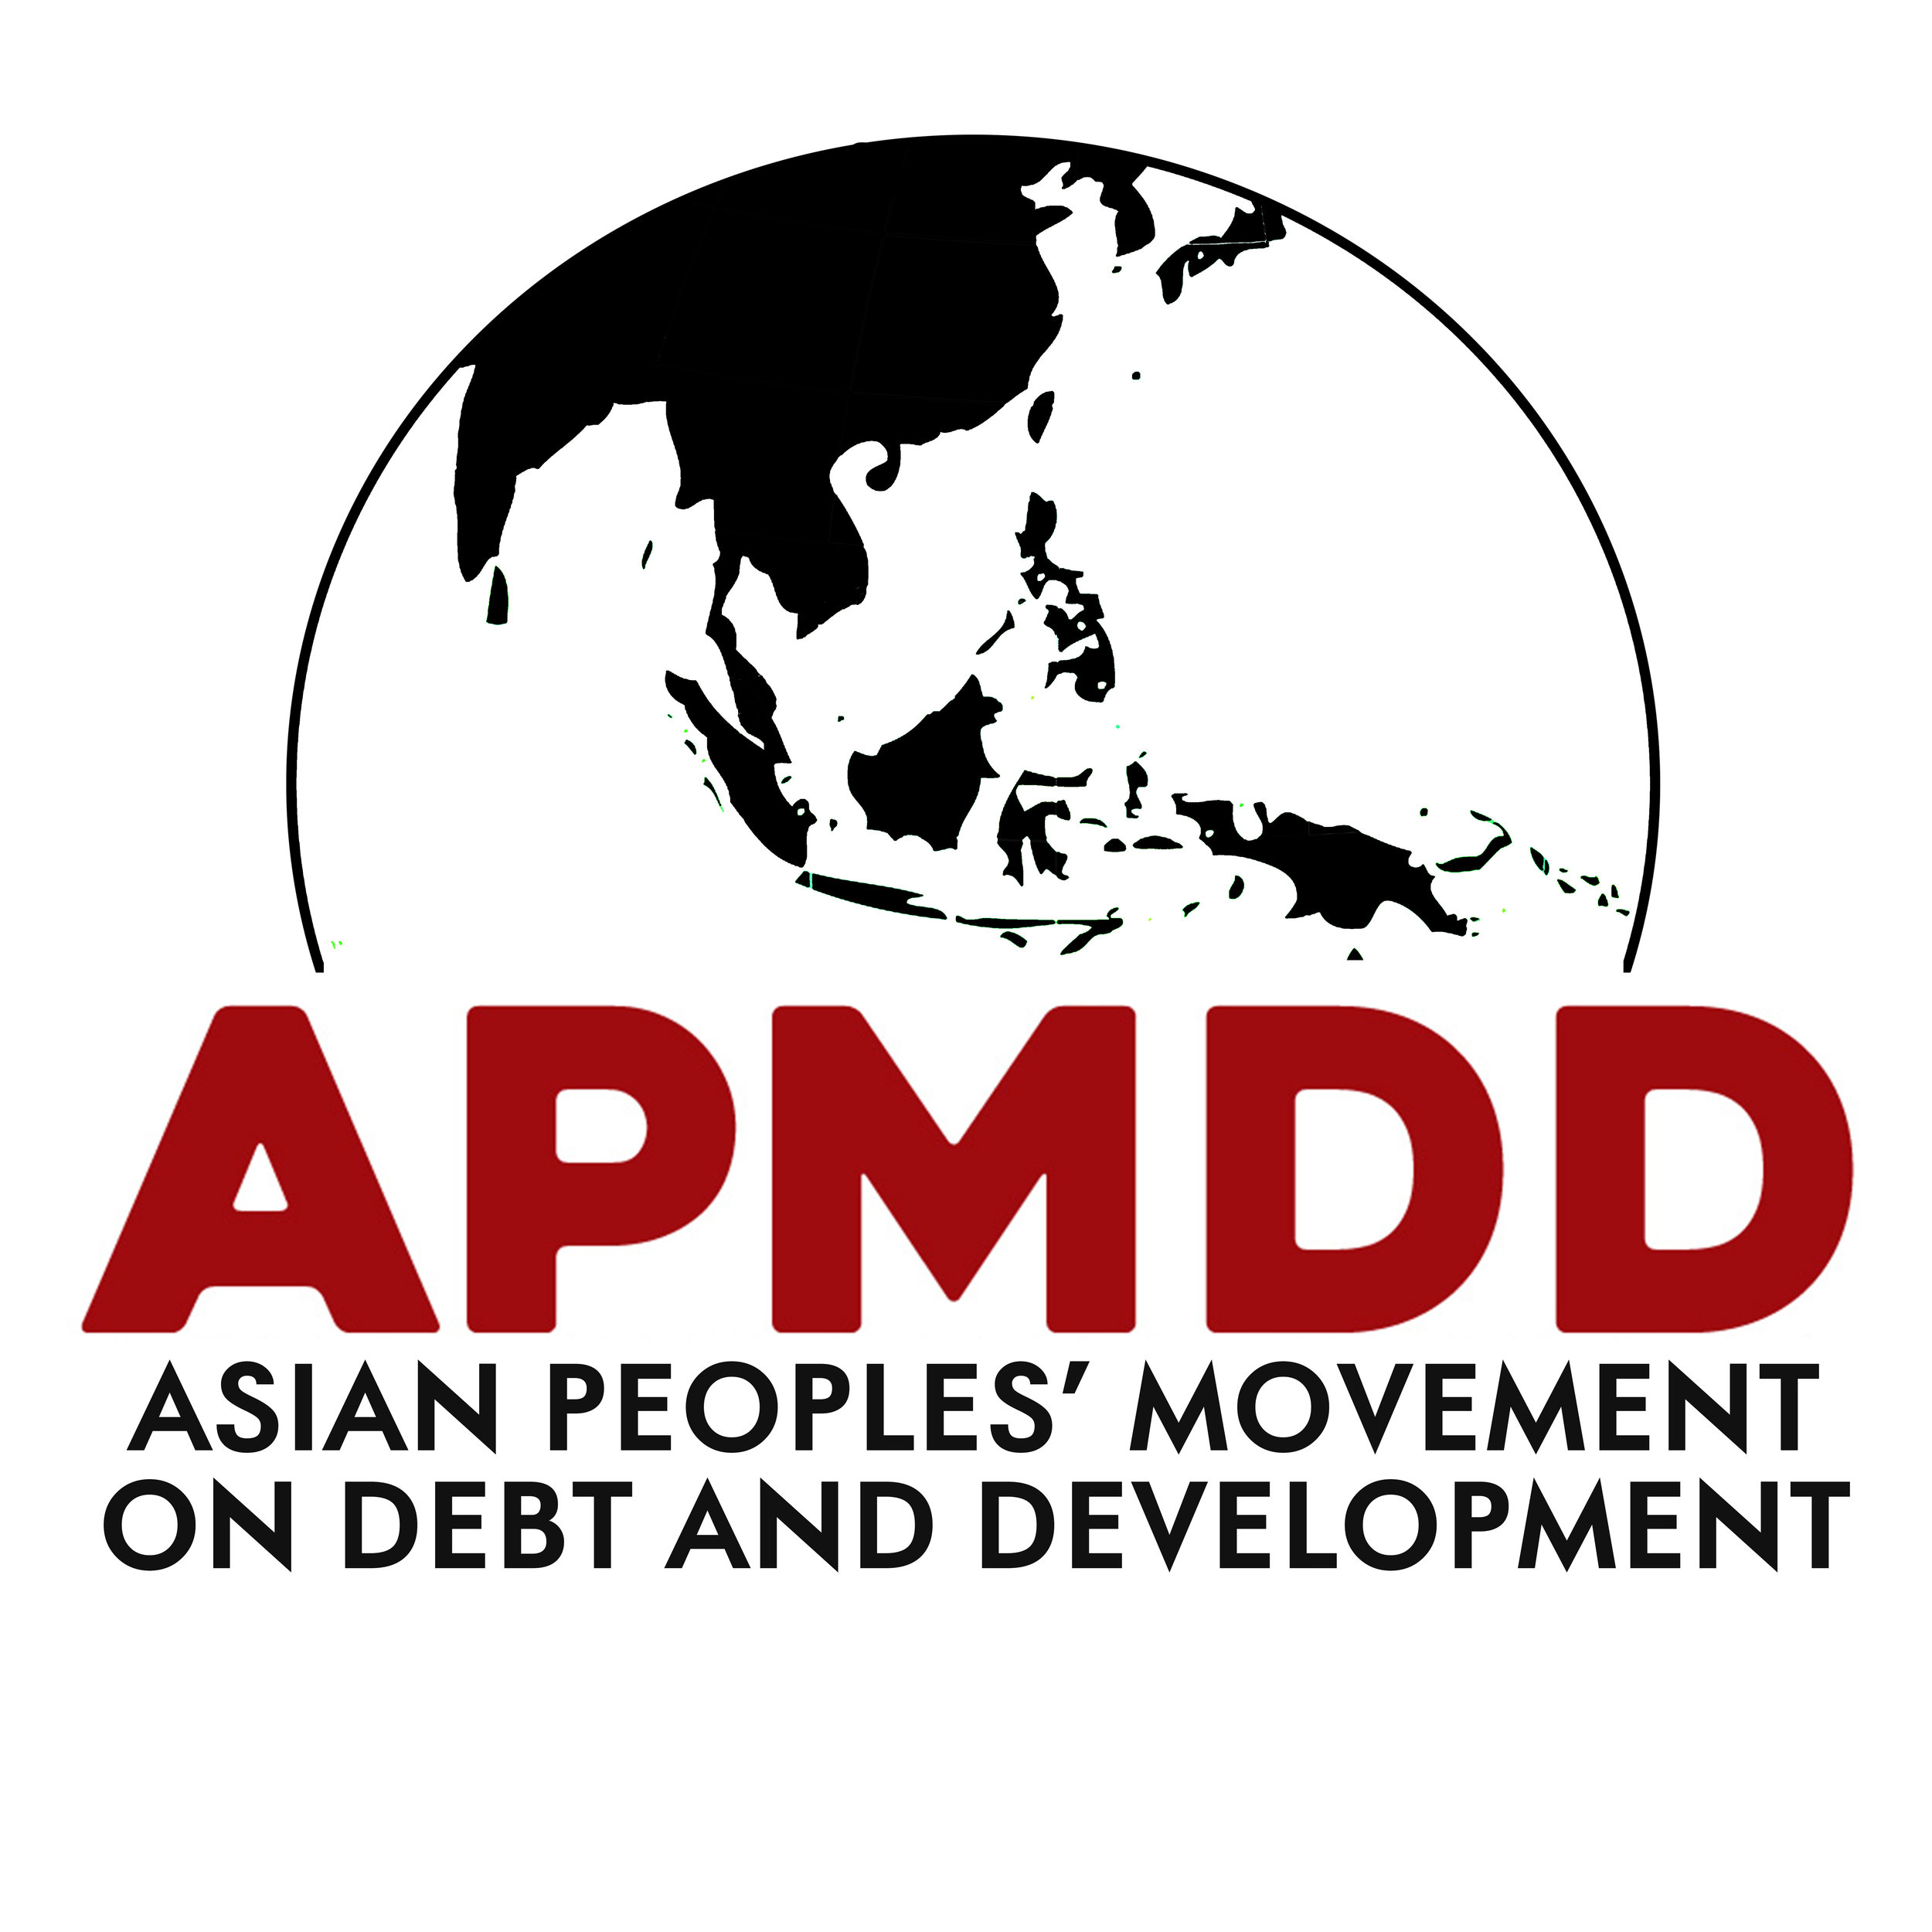 Asian Peoples' Movement on Debt and Development (APMDD)